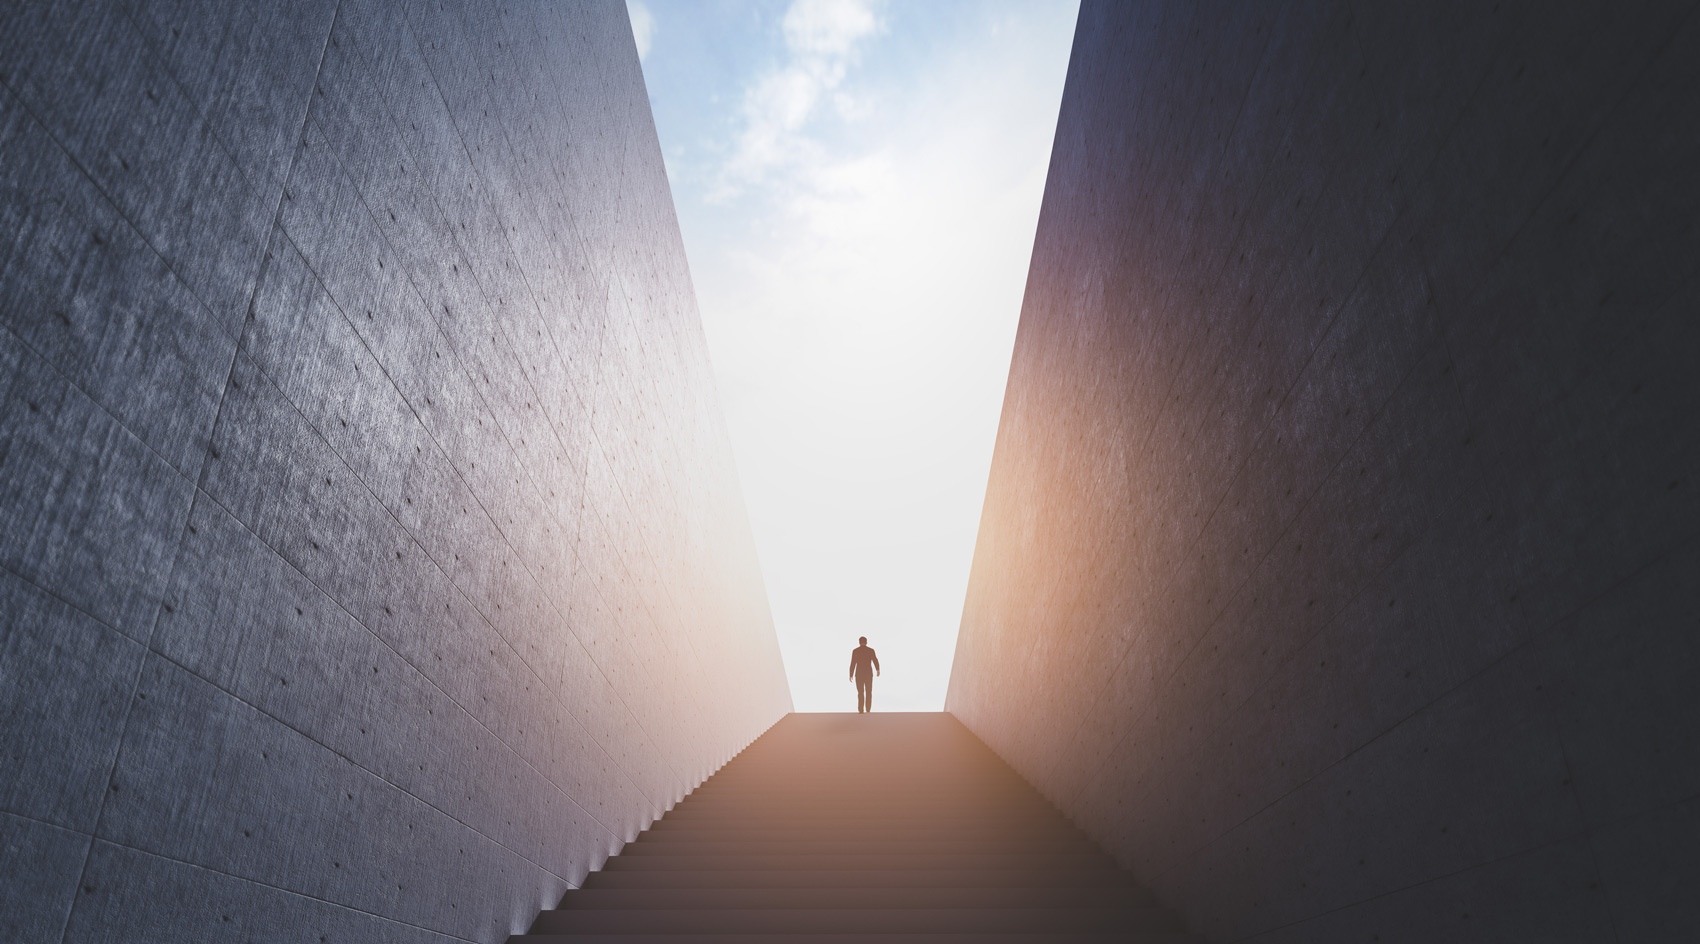 Man At Top Of Stairs - Succession Planning for Founders